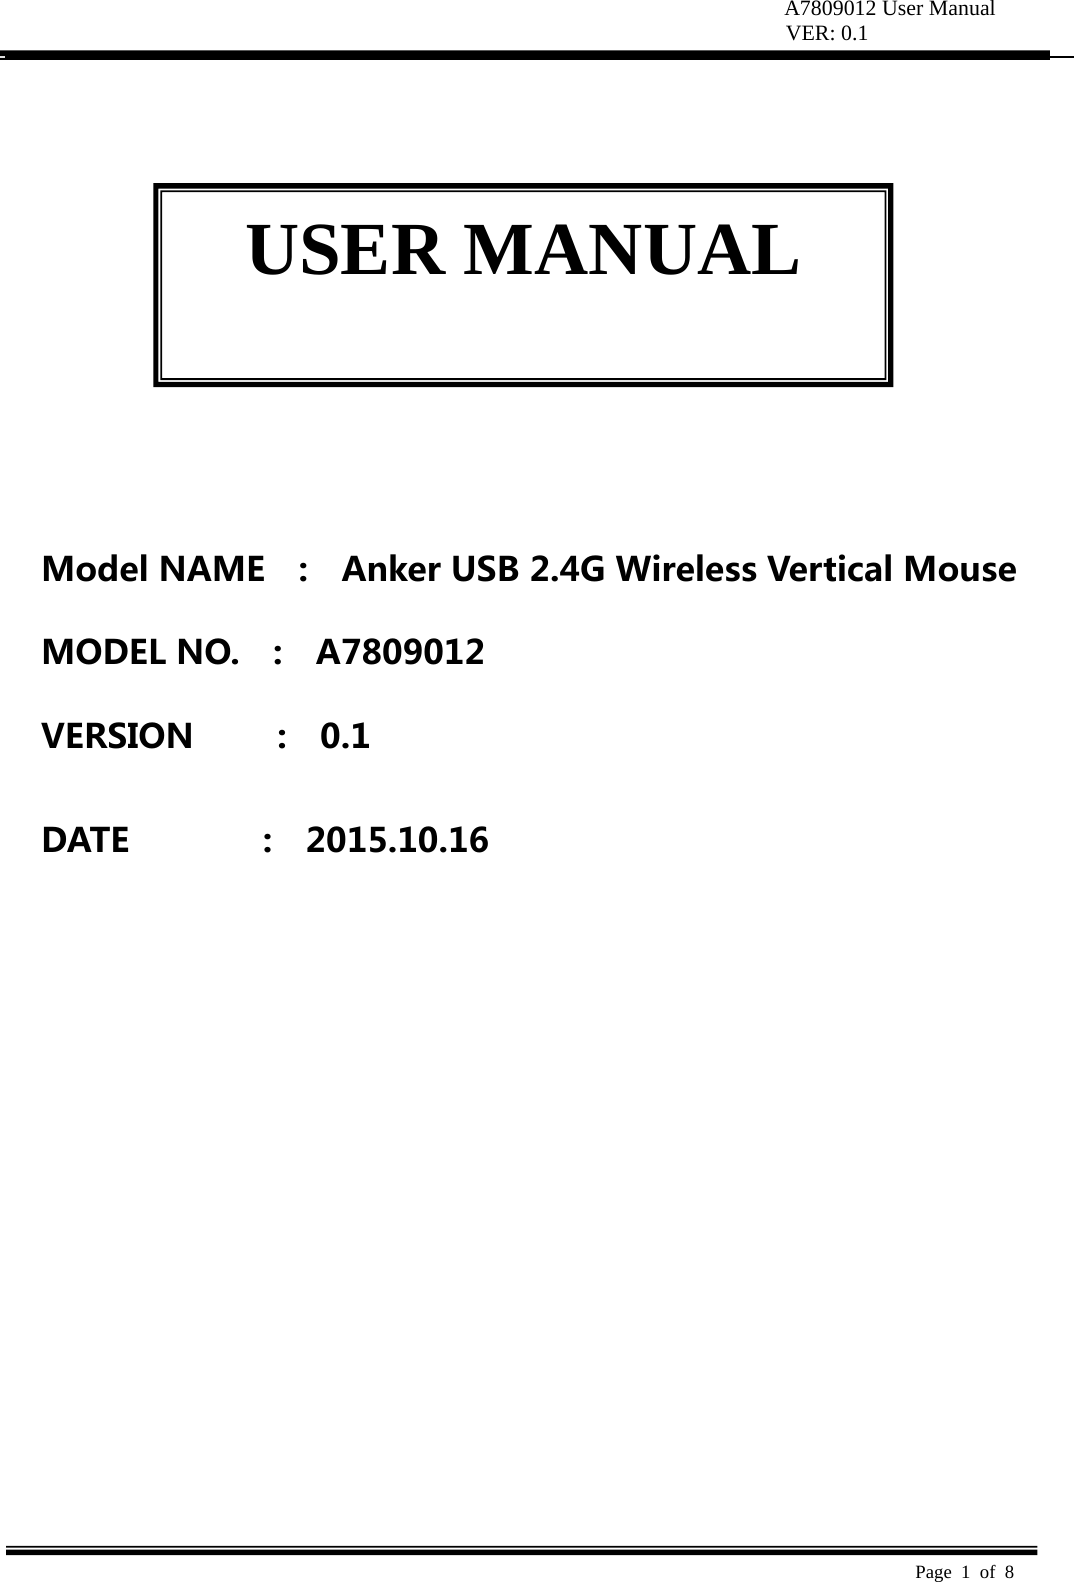 A7809012 User Manual VER: 0.1  Page 1 of 8            ModelNAME  :  AnkerUSB2.4GWirelessVerticalMouseMODELNO.  :  A7809012VERSION:0.1DATE:2015.10.16USER MANUAL 